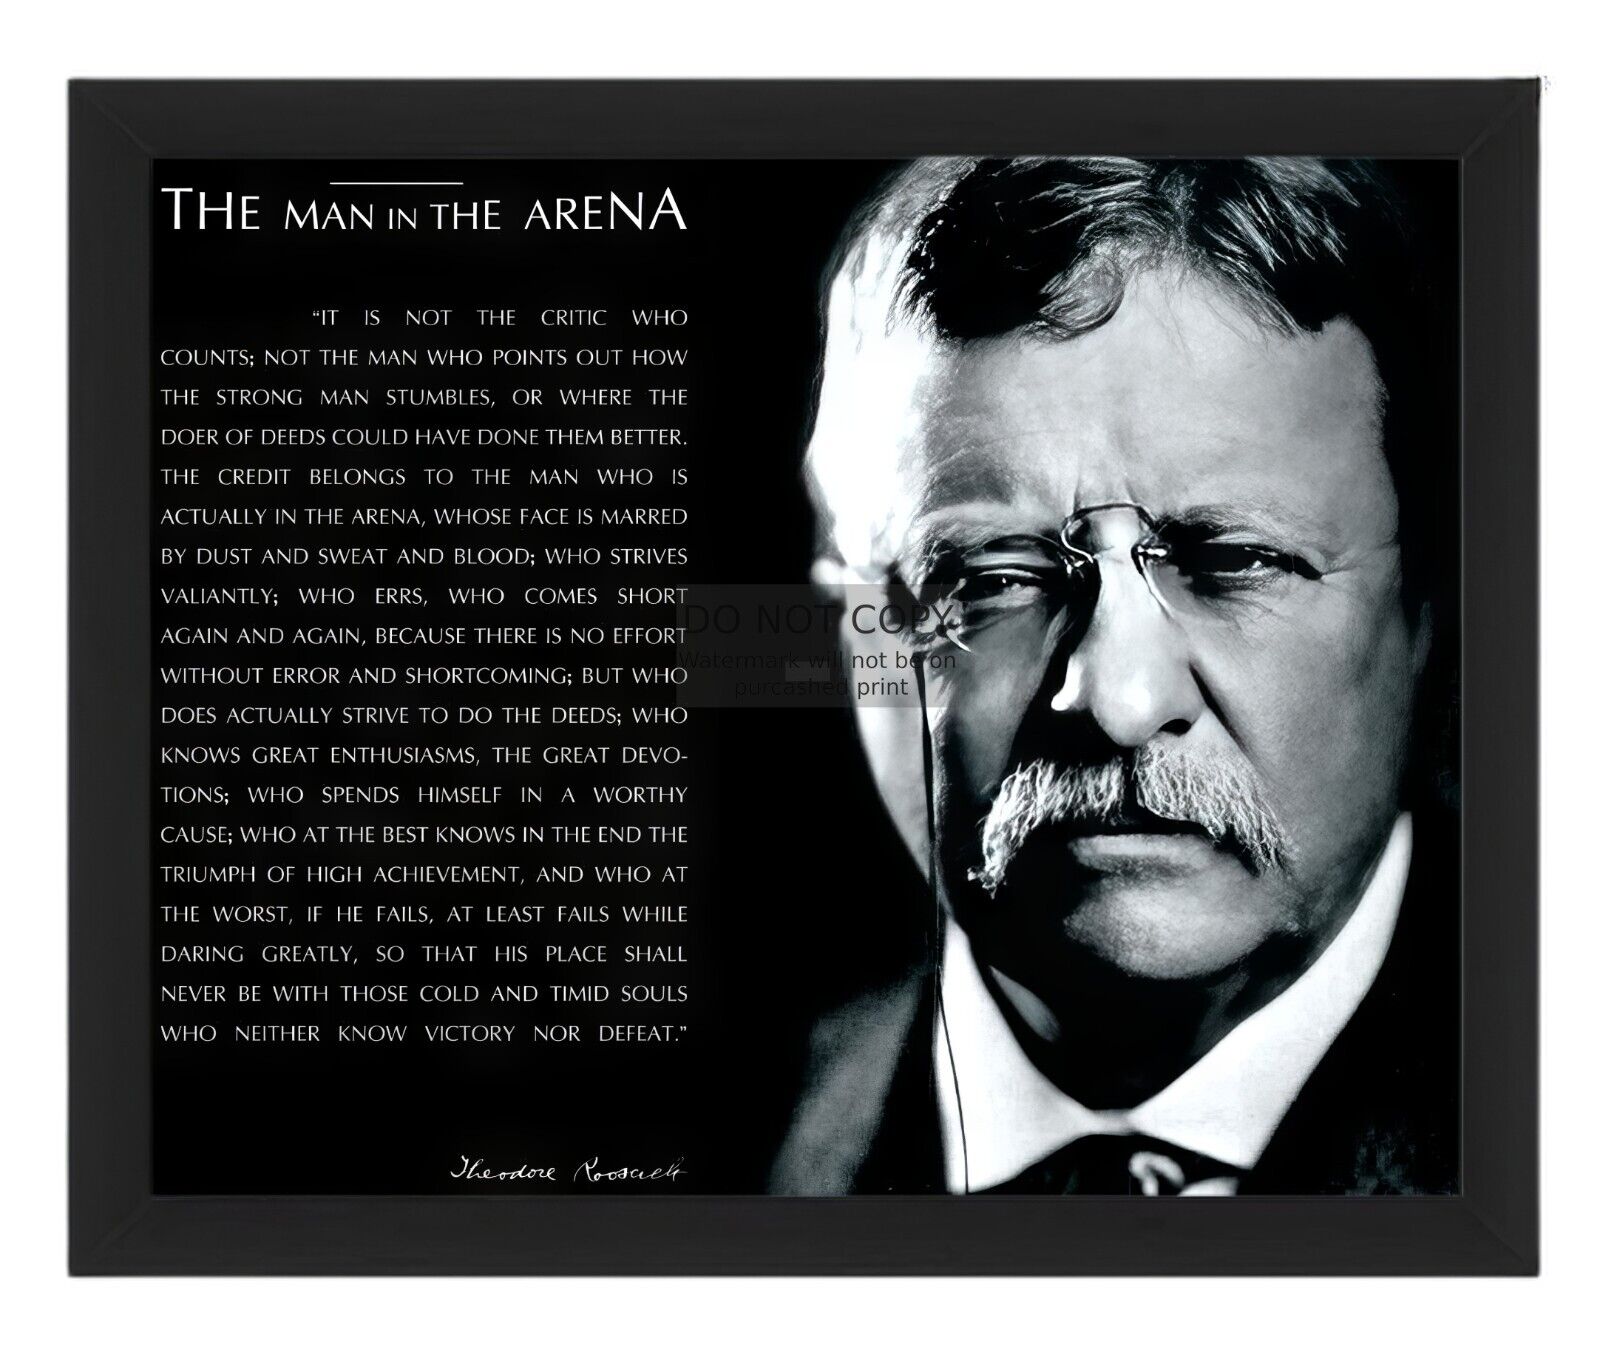 PRESIDENT THEODORE TEDDY ROOSEVELT THE MAN IN THE ARENA 8X10 FRAMED PHOTO